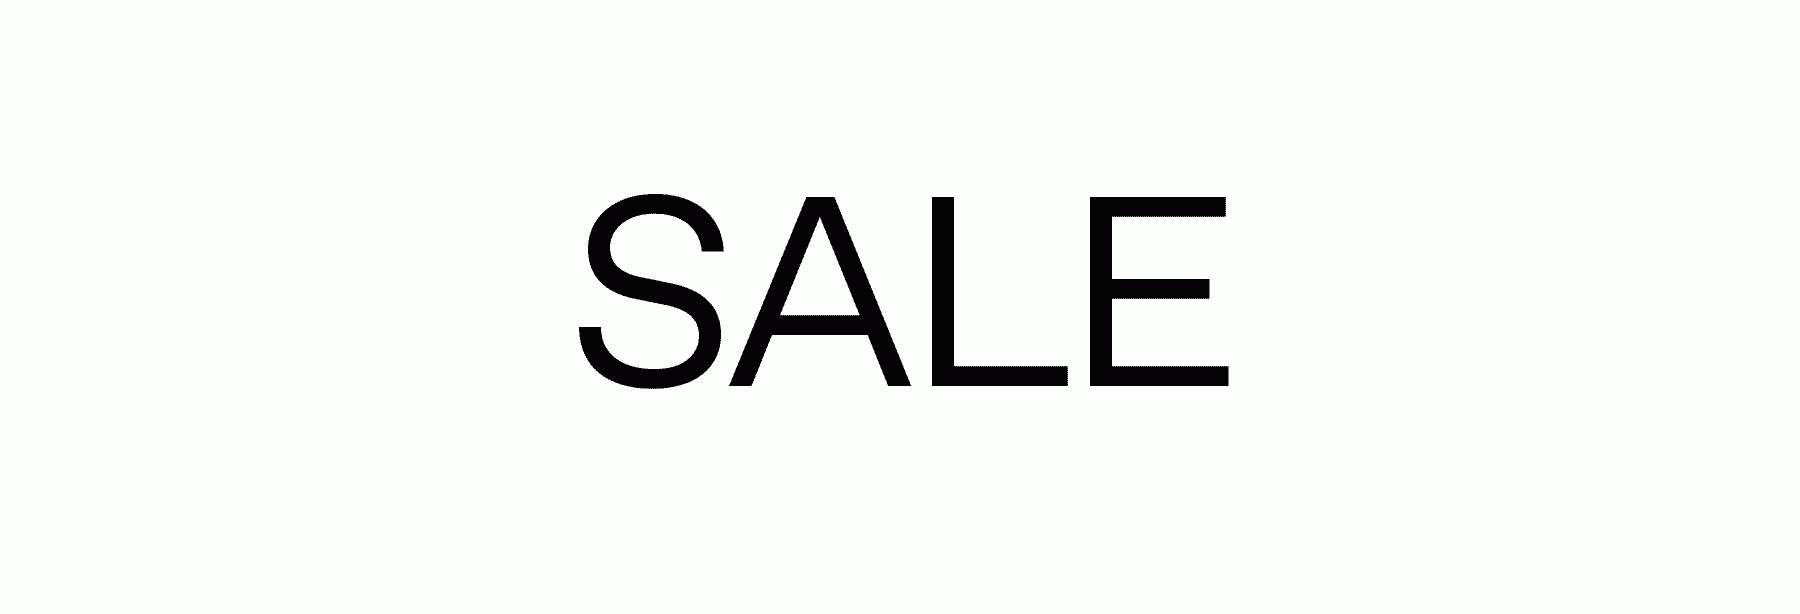 SALE: Up to 70% Off